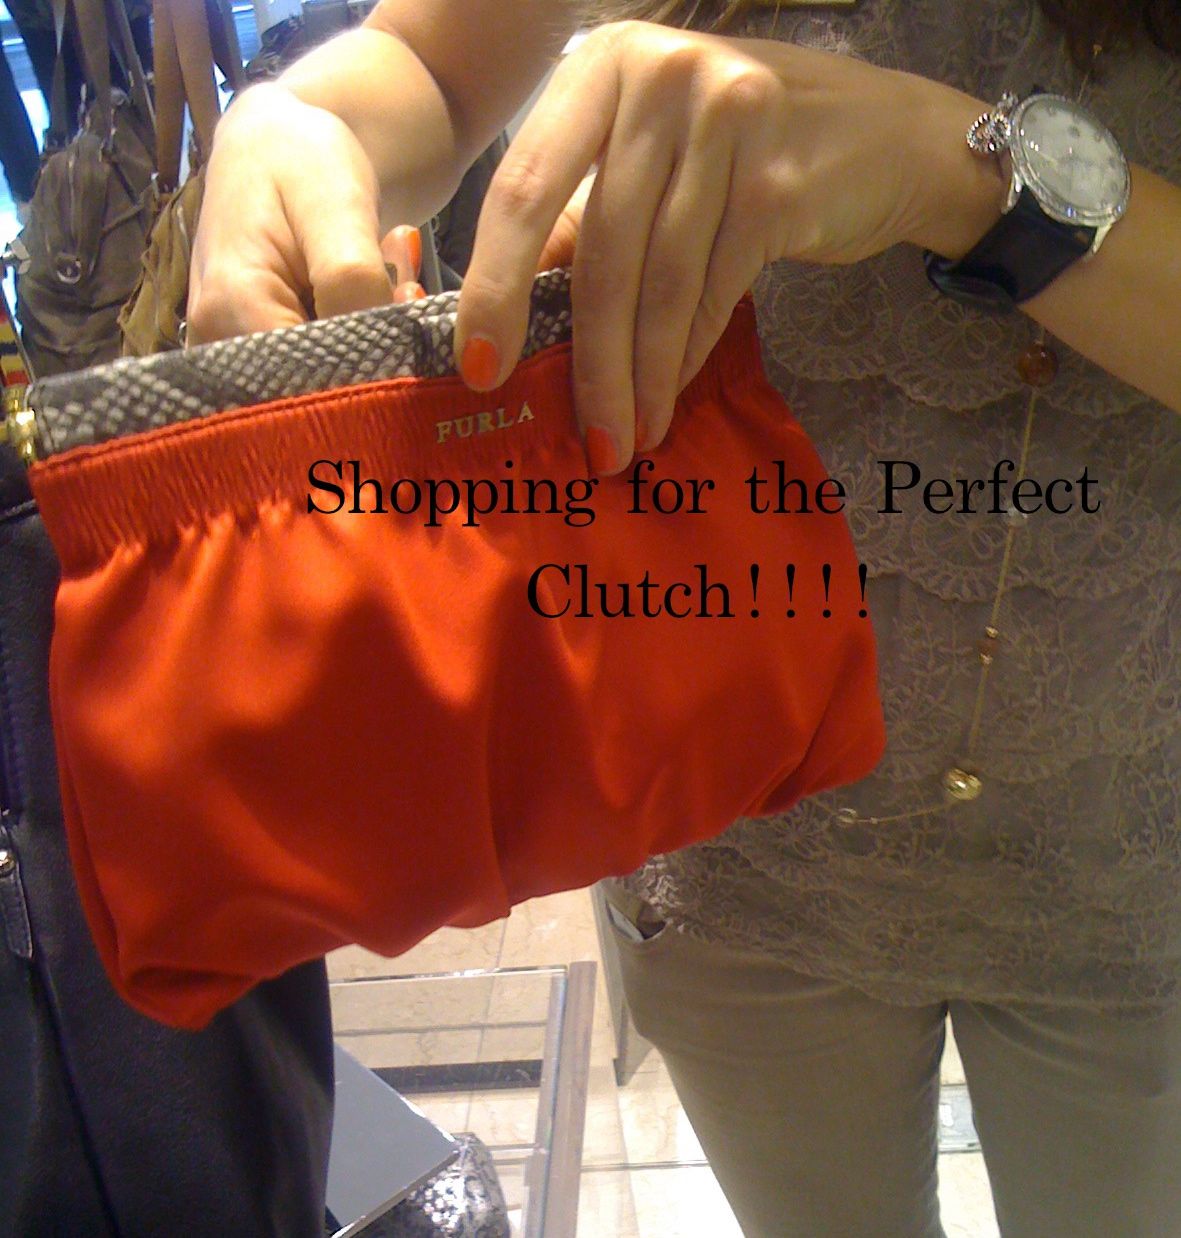 Read more about the article <!--:en-->The Perfect Red Clutch!!!!!!Gala Clutch Shopping!!!!<!--:-->